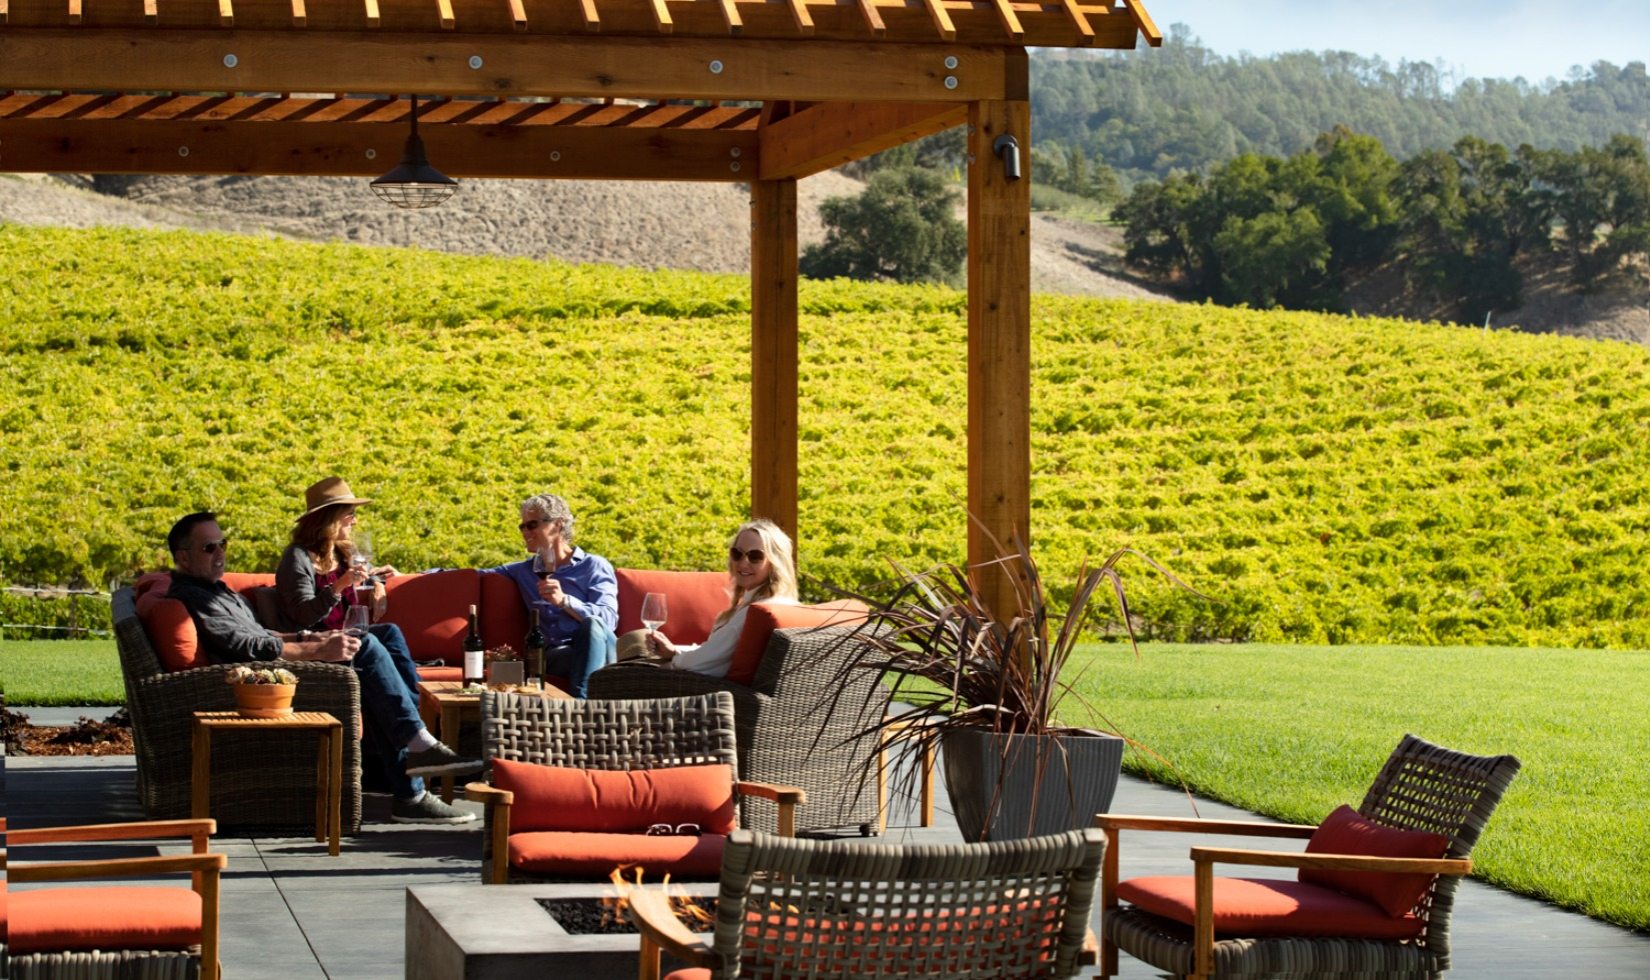 Group on winery terrace on outdoor couches wine tasting